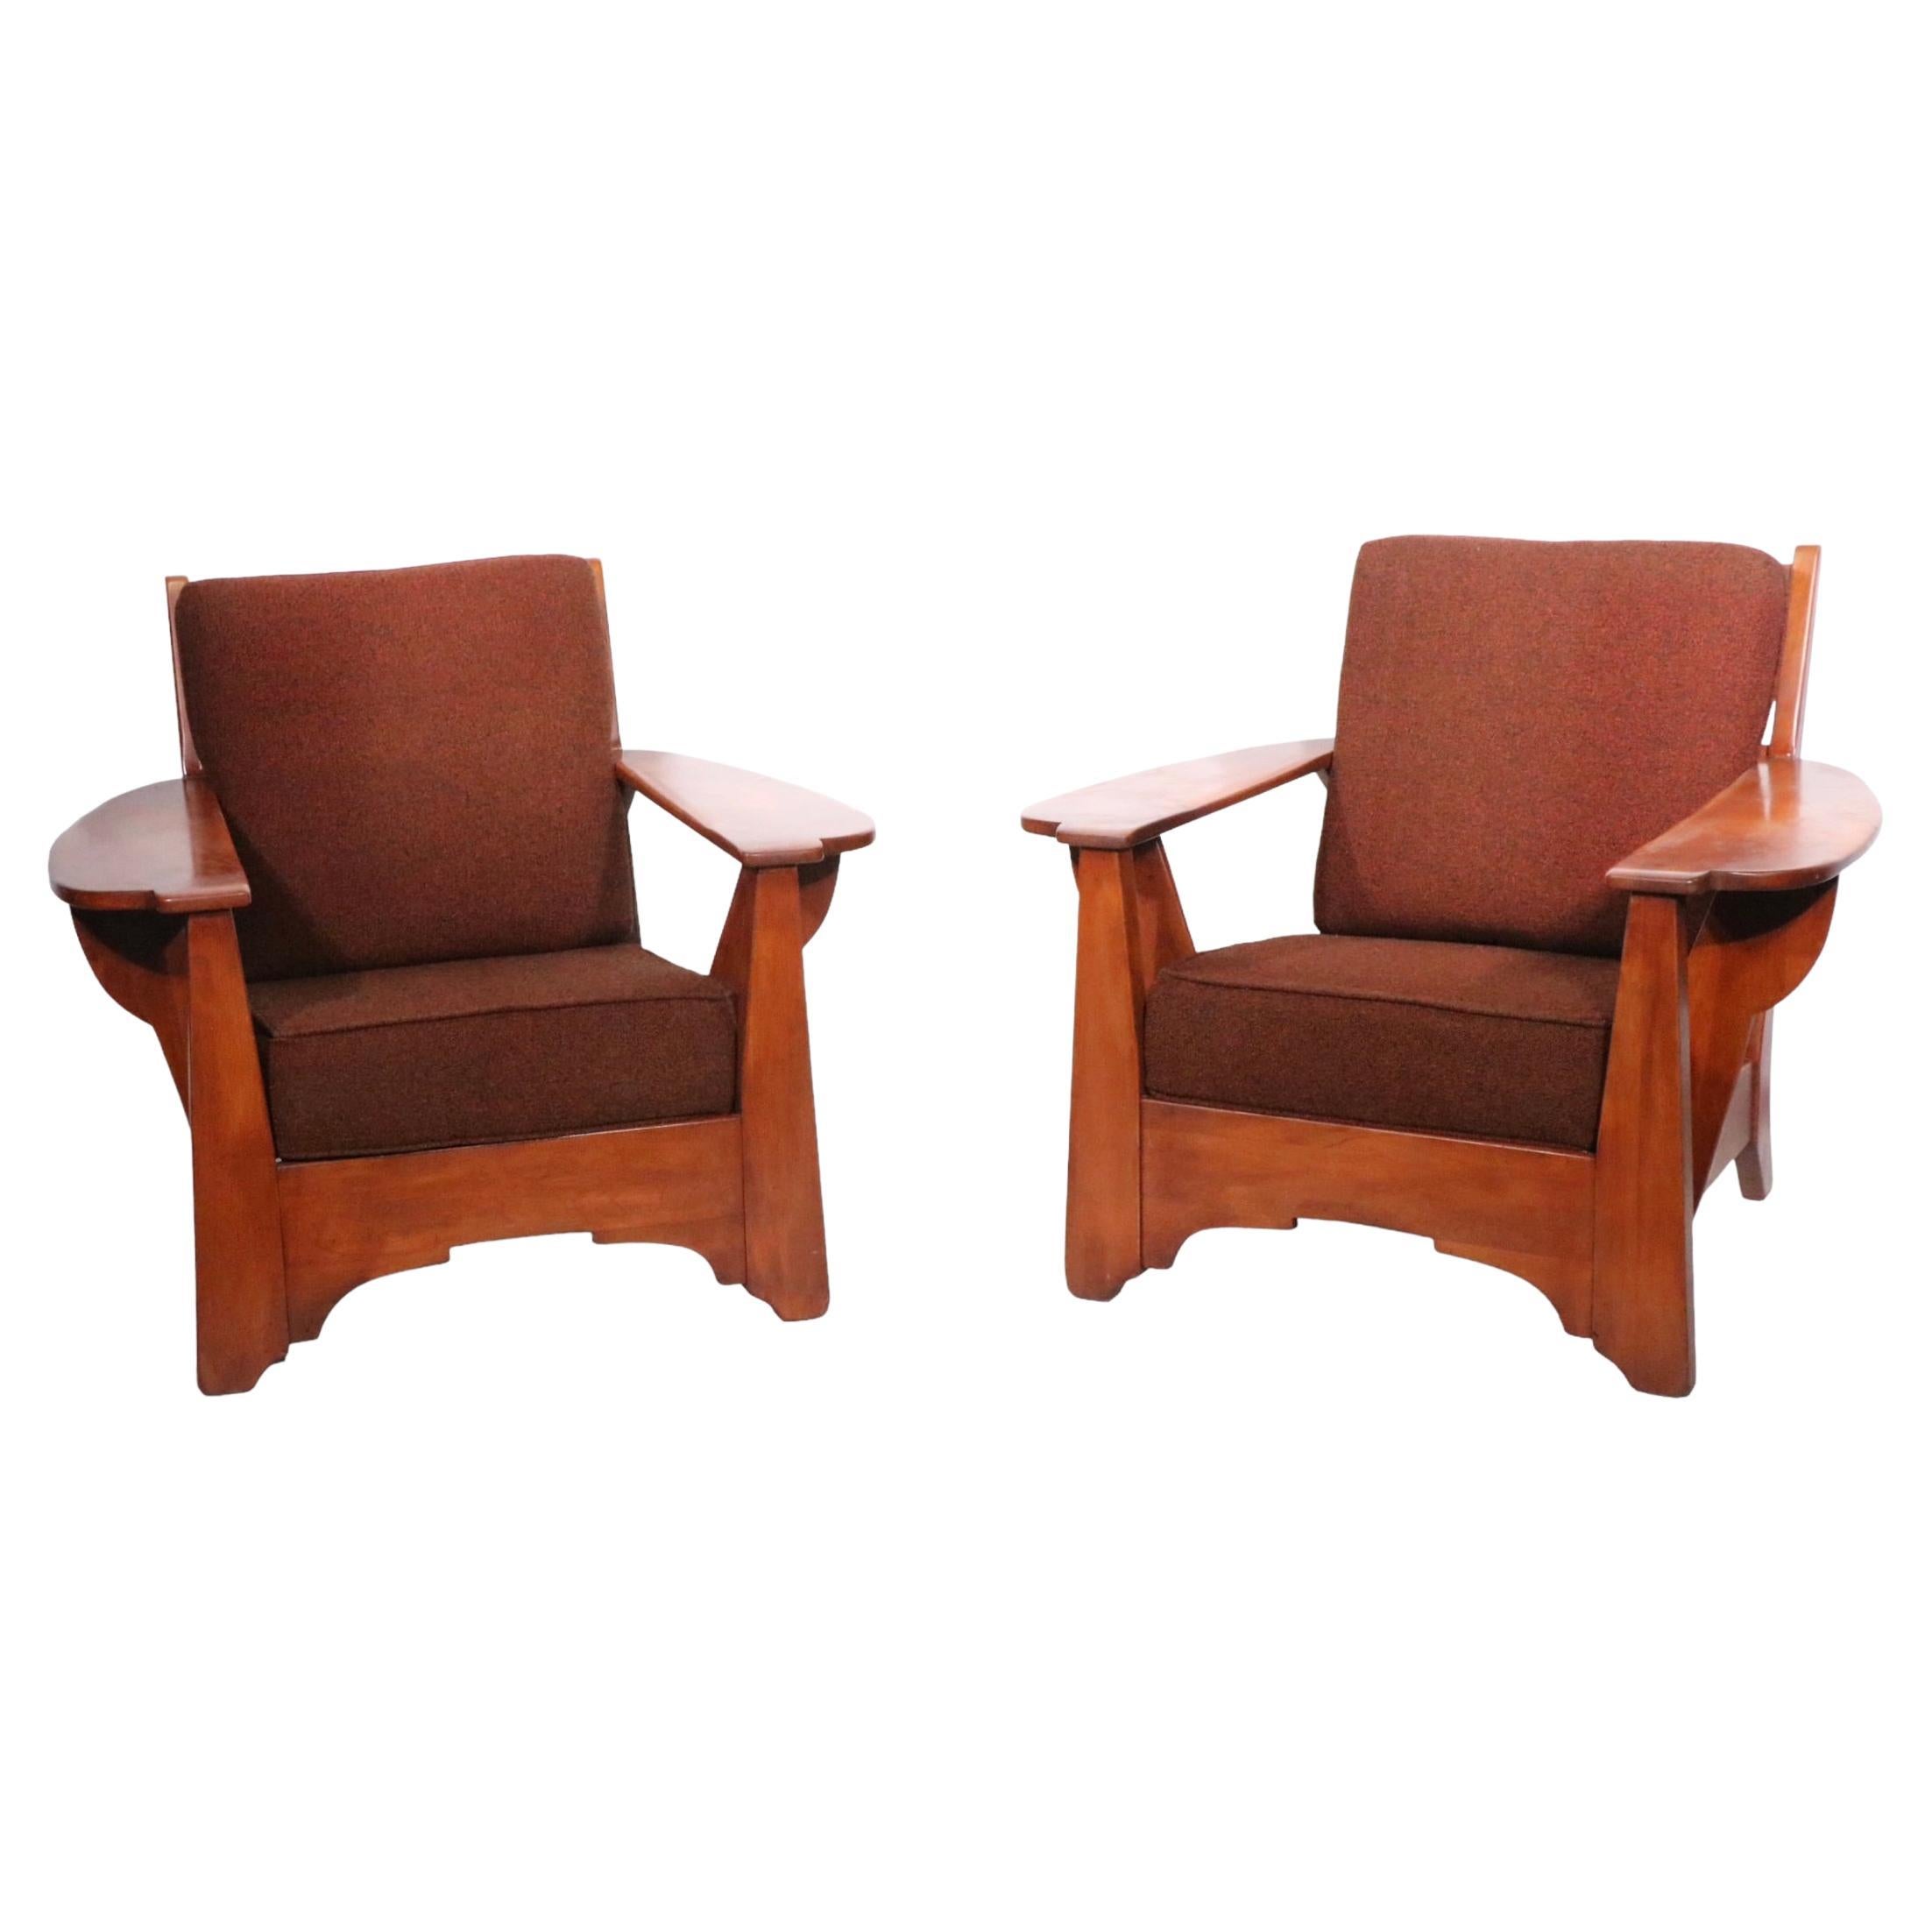 Pr. Paddle Arm Lounge Chairs by Herman de Vries for Cushman Colonial, c 1940-50s